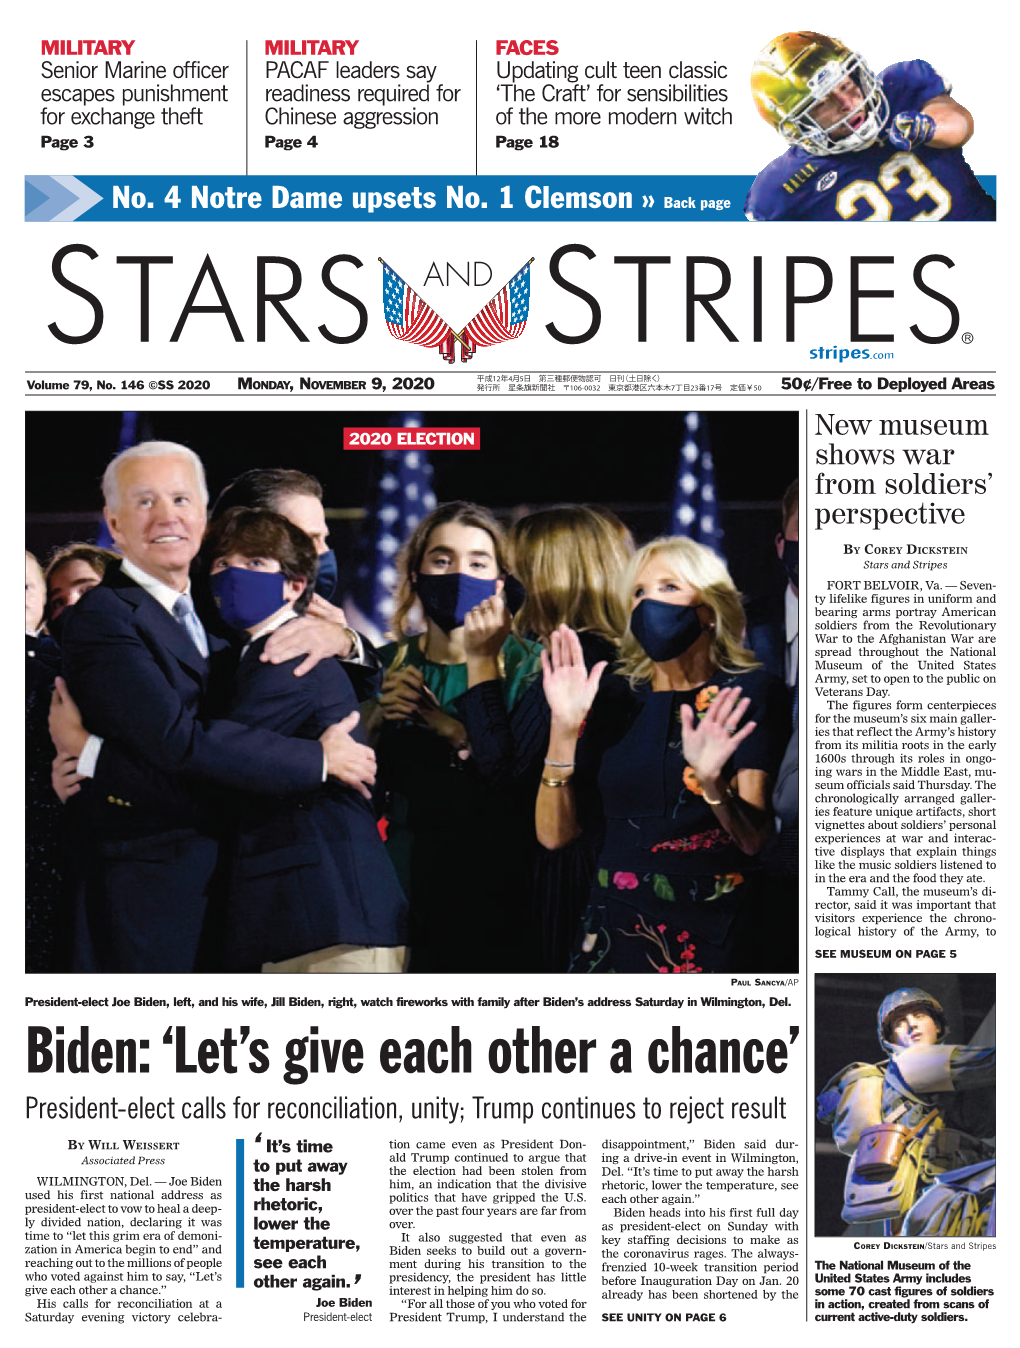 Biden, Left, and His Wife, Jill Biden, Right, Watch Fireworks with Family After Biden’S Address Saturday in Wilmington, Del